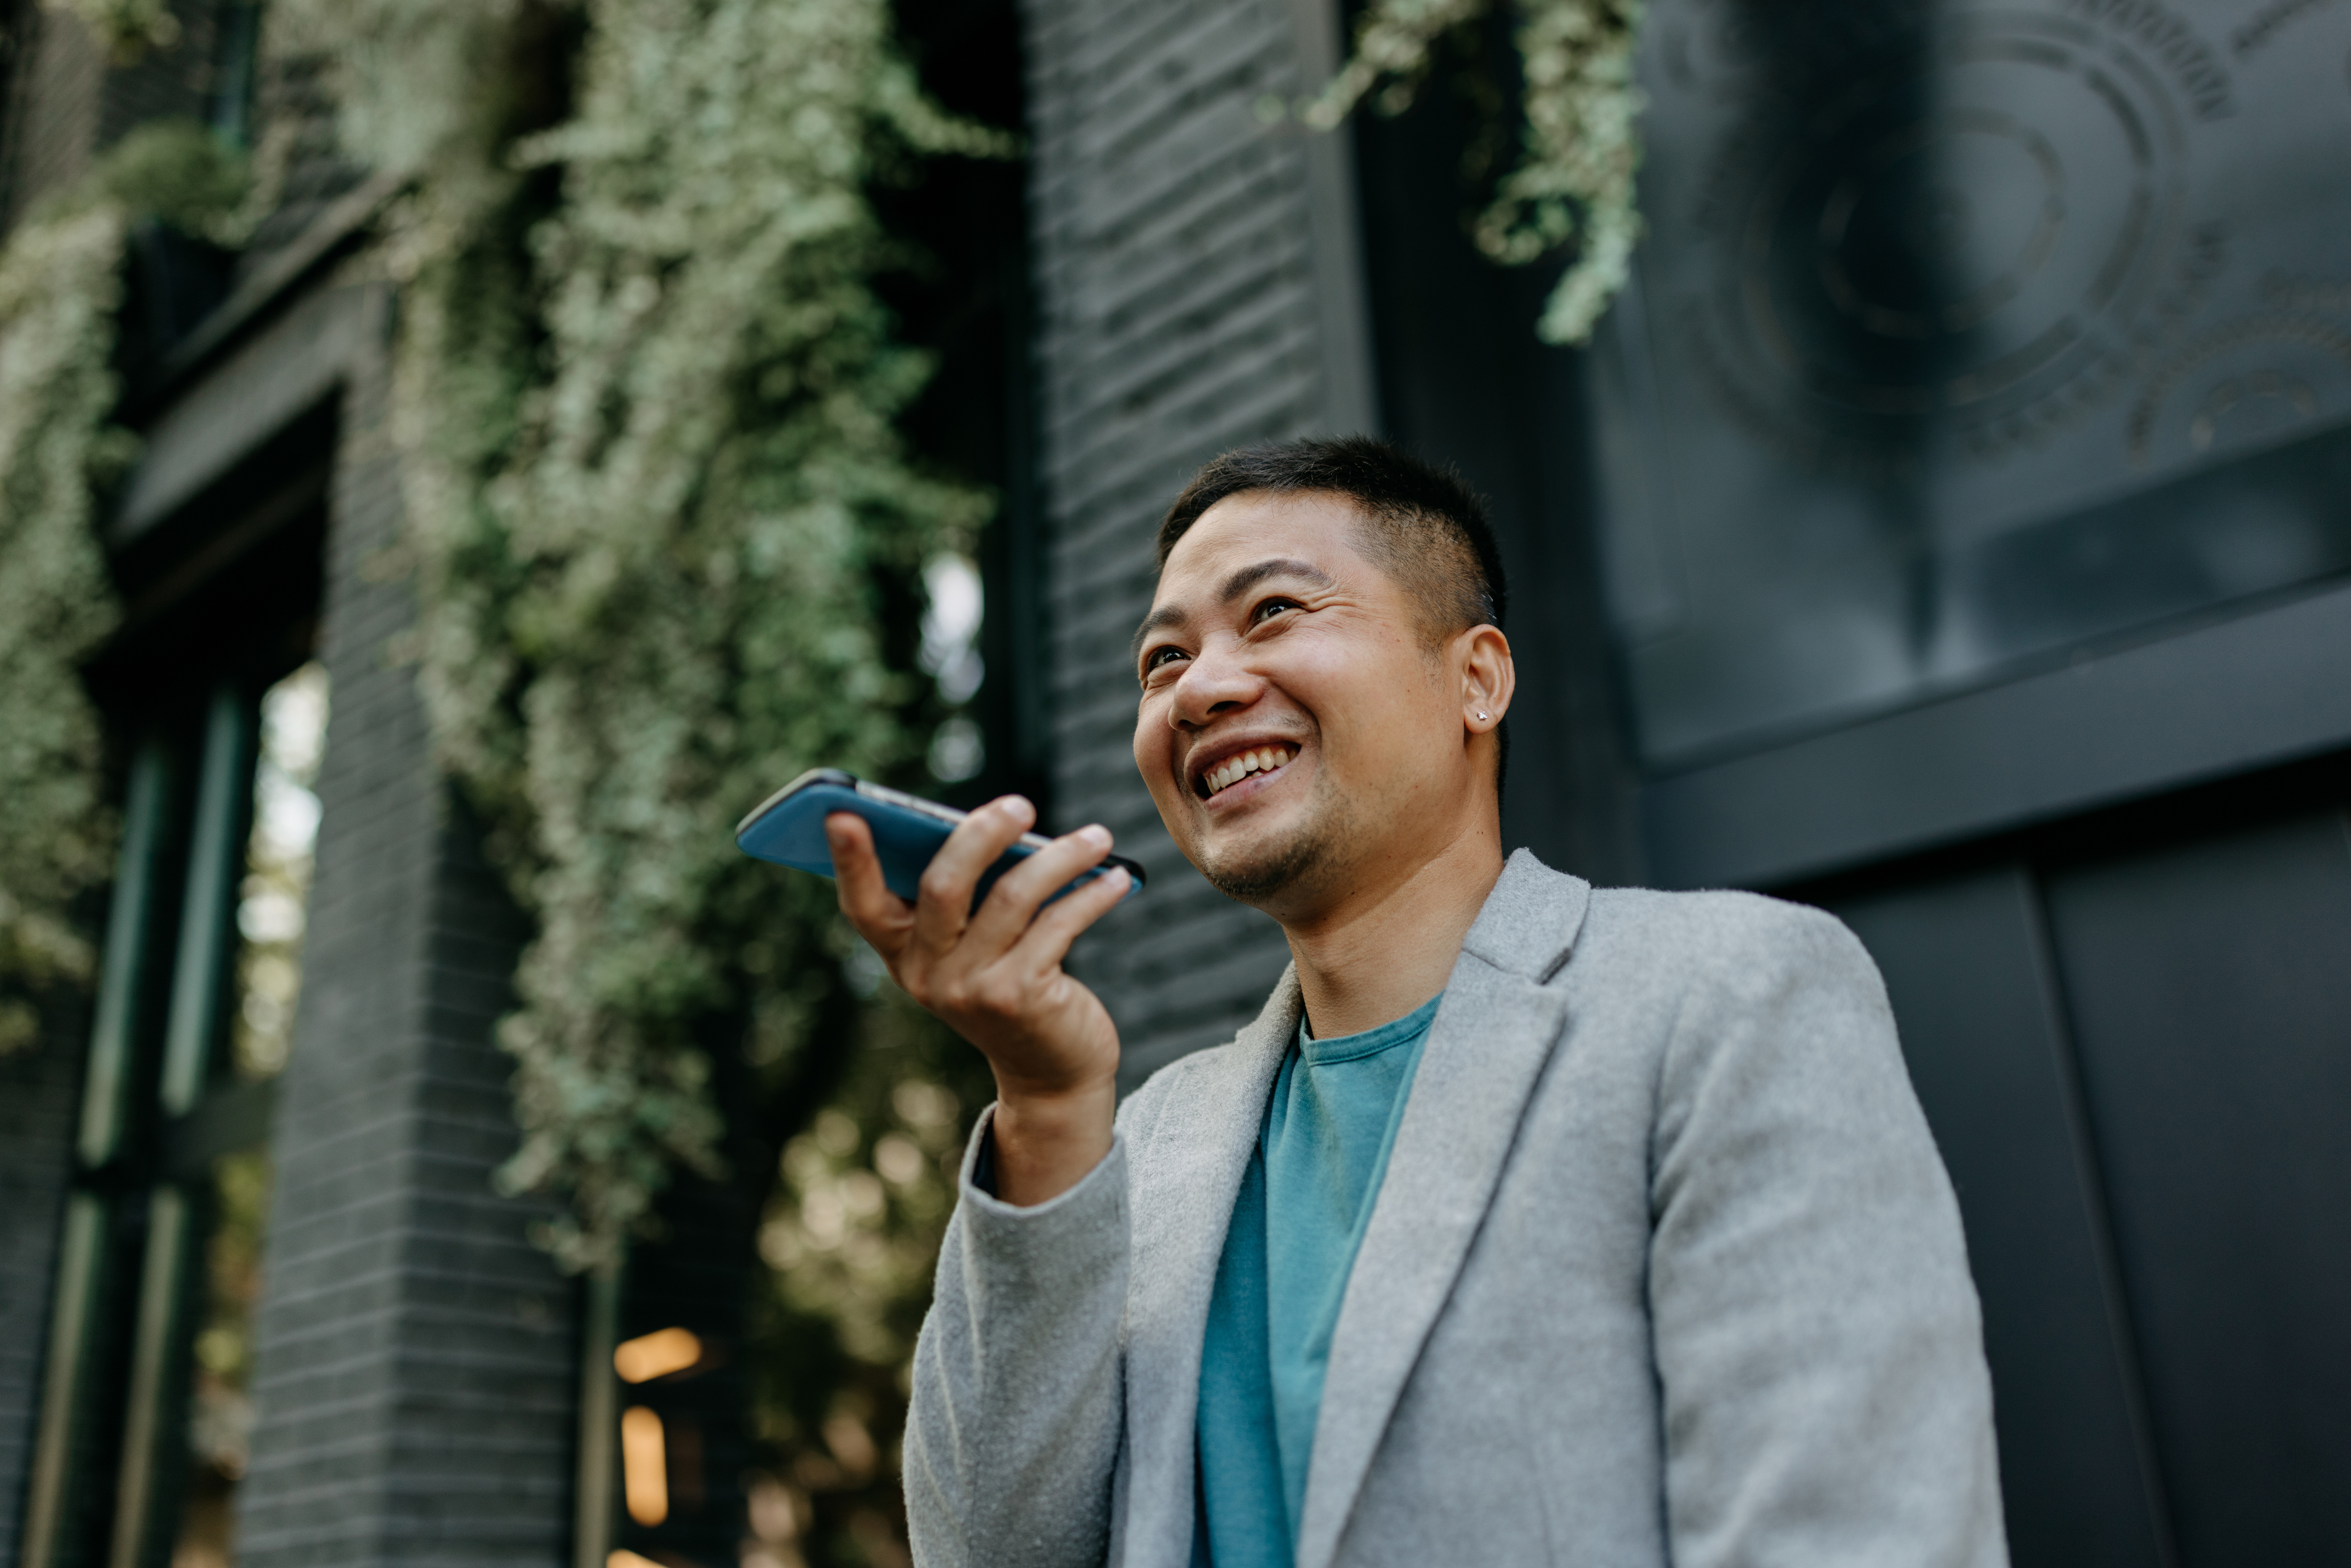 Man in a blazer holding a smartphone, smiling and looking away as if in a conversation